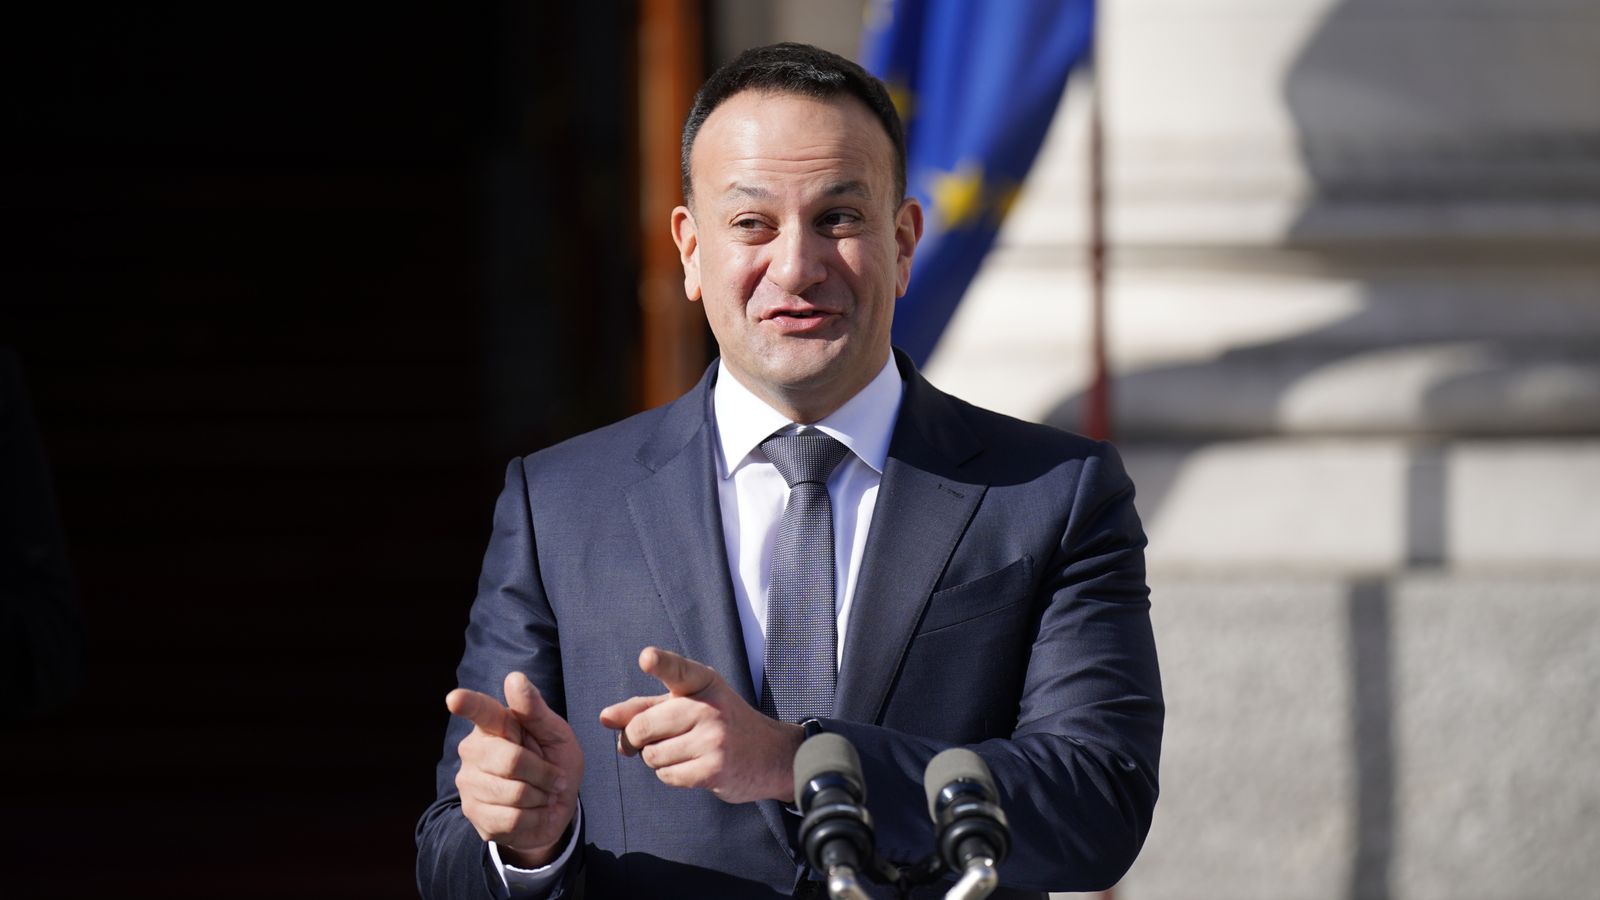 UK and EU 'inching towards' Northern Ireland post-Brexit trade deal, Irish prime minister says